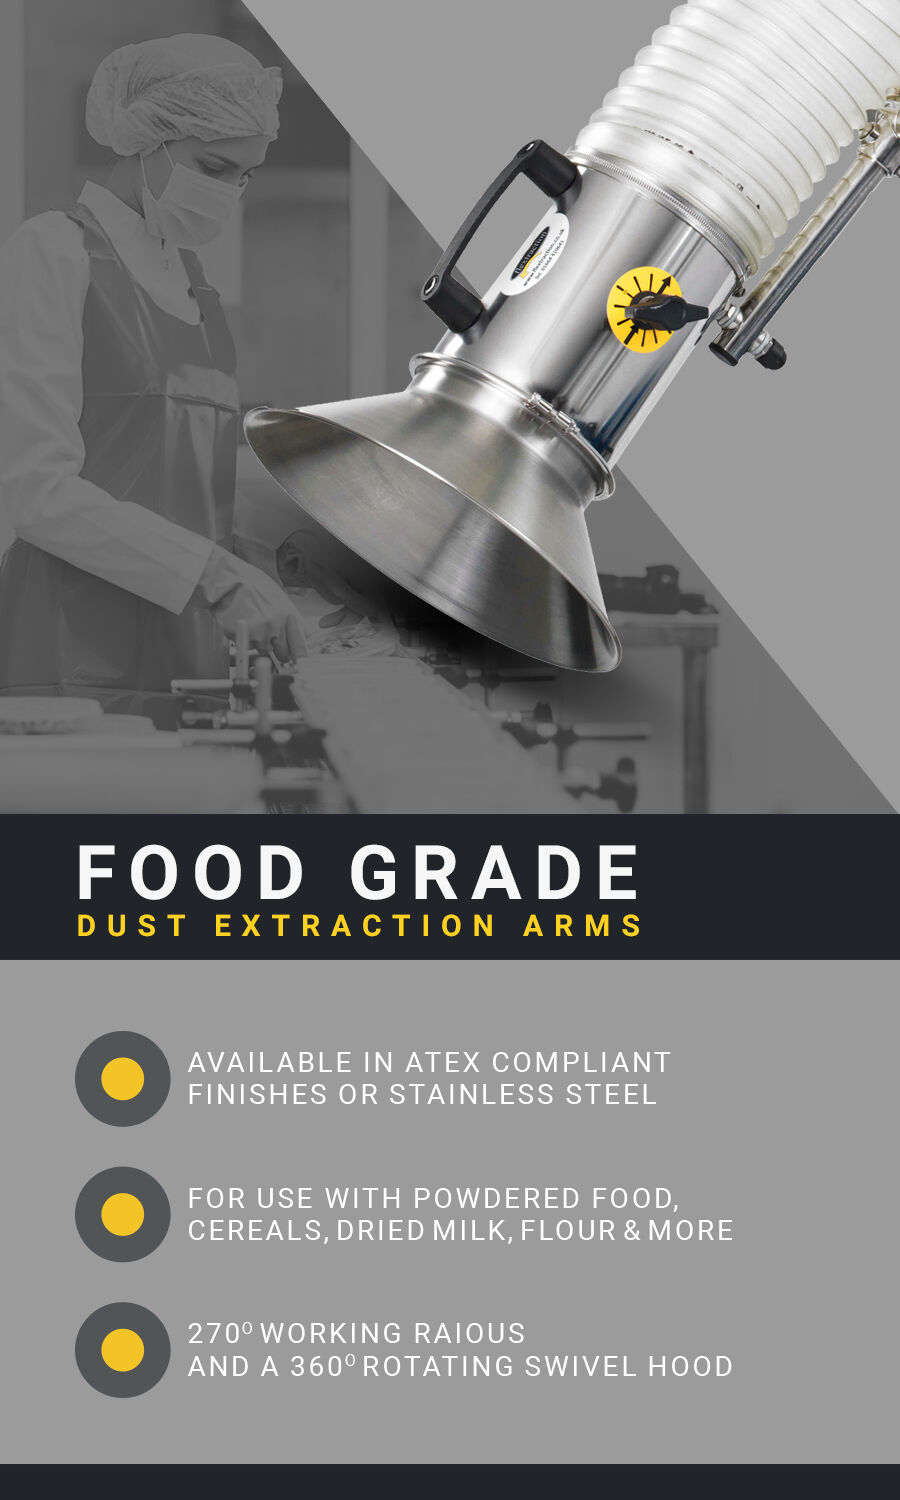 Food grade extraction arm atex compliant and stainless steel flextraction ltd